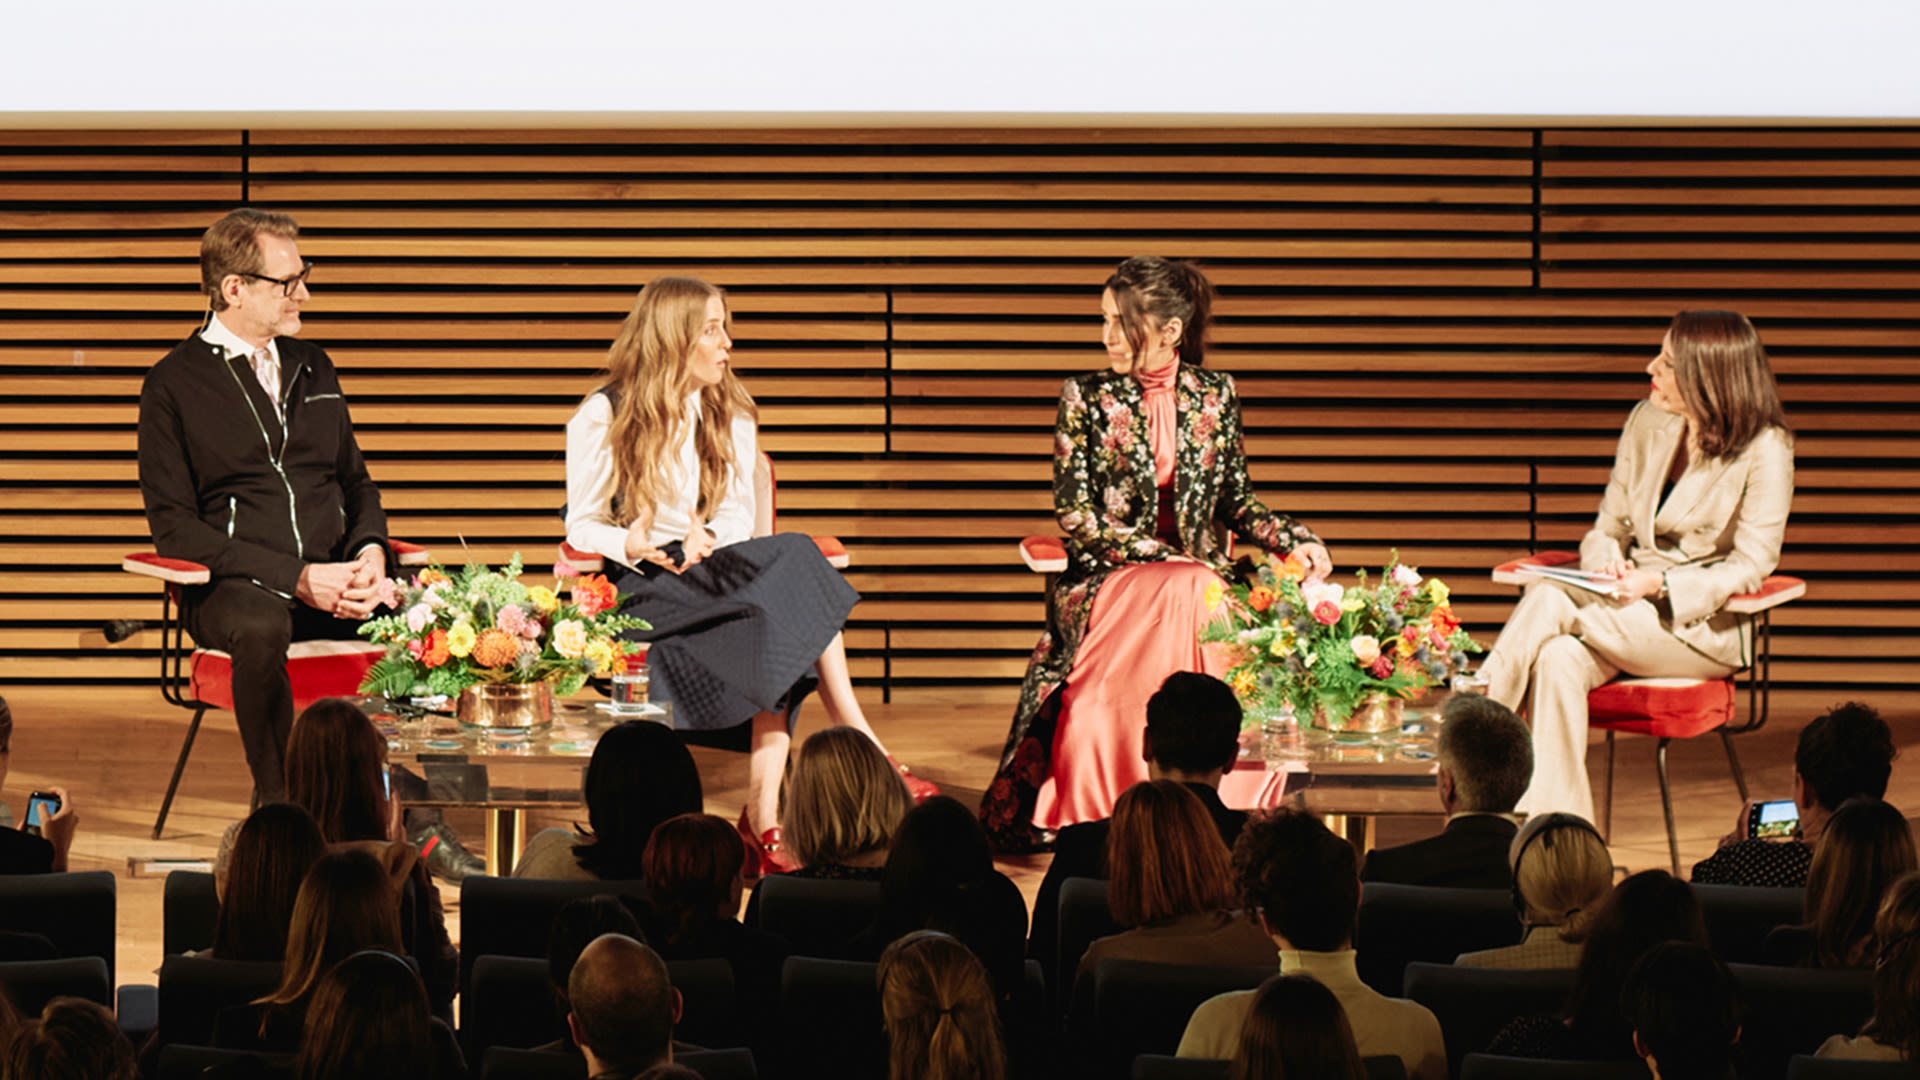 Donna Adi and Leti Sala discussing digital creativity at the roundtable with Vogue Spain and The Bicester Collection